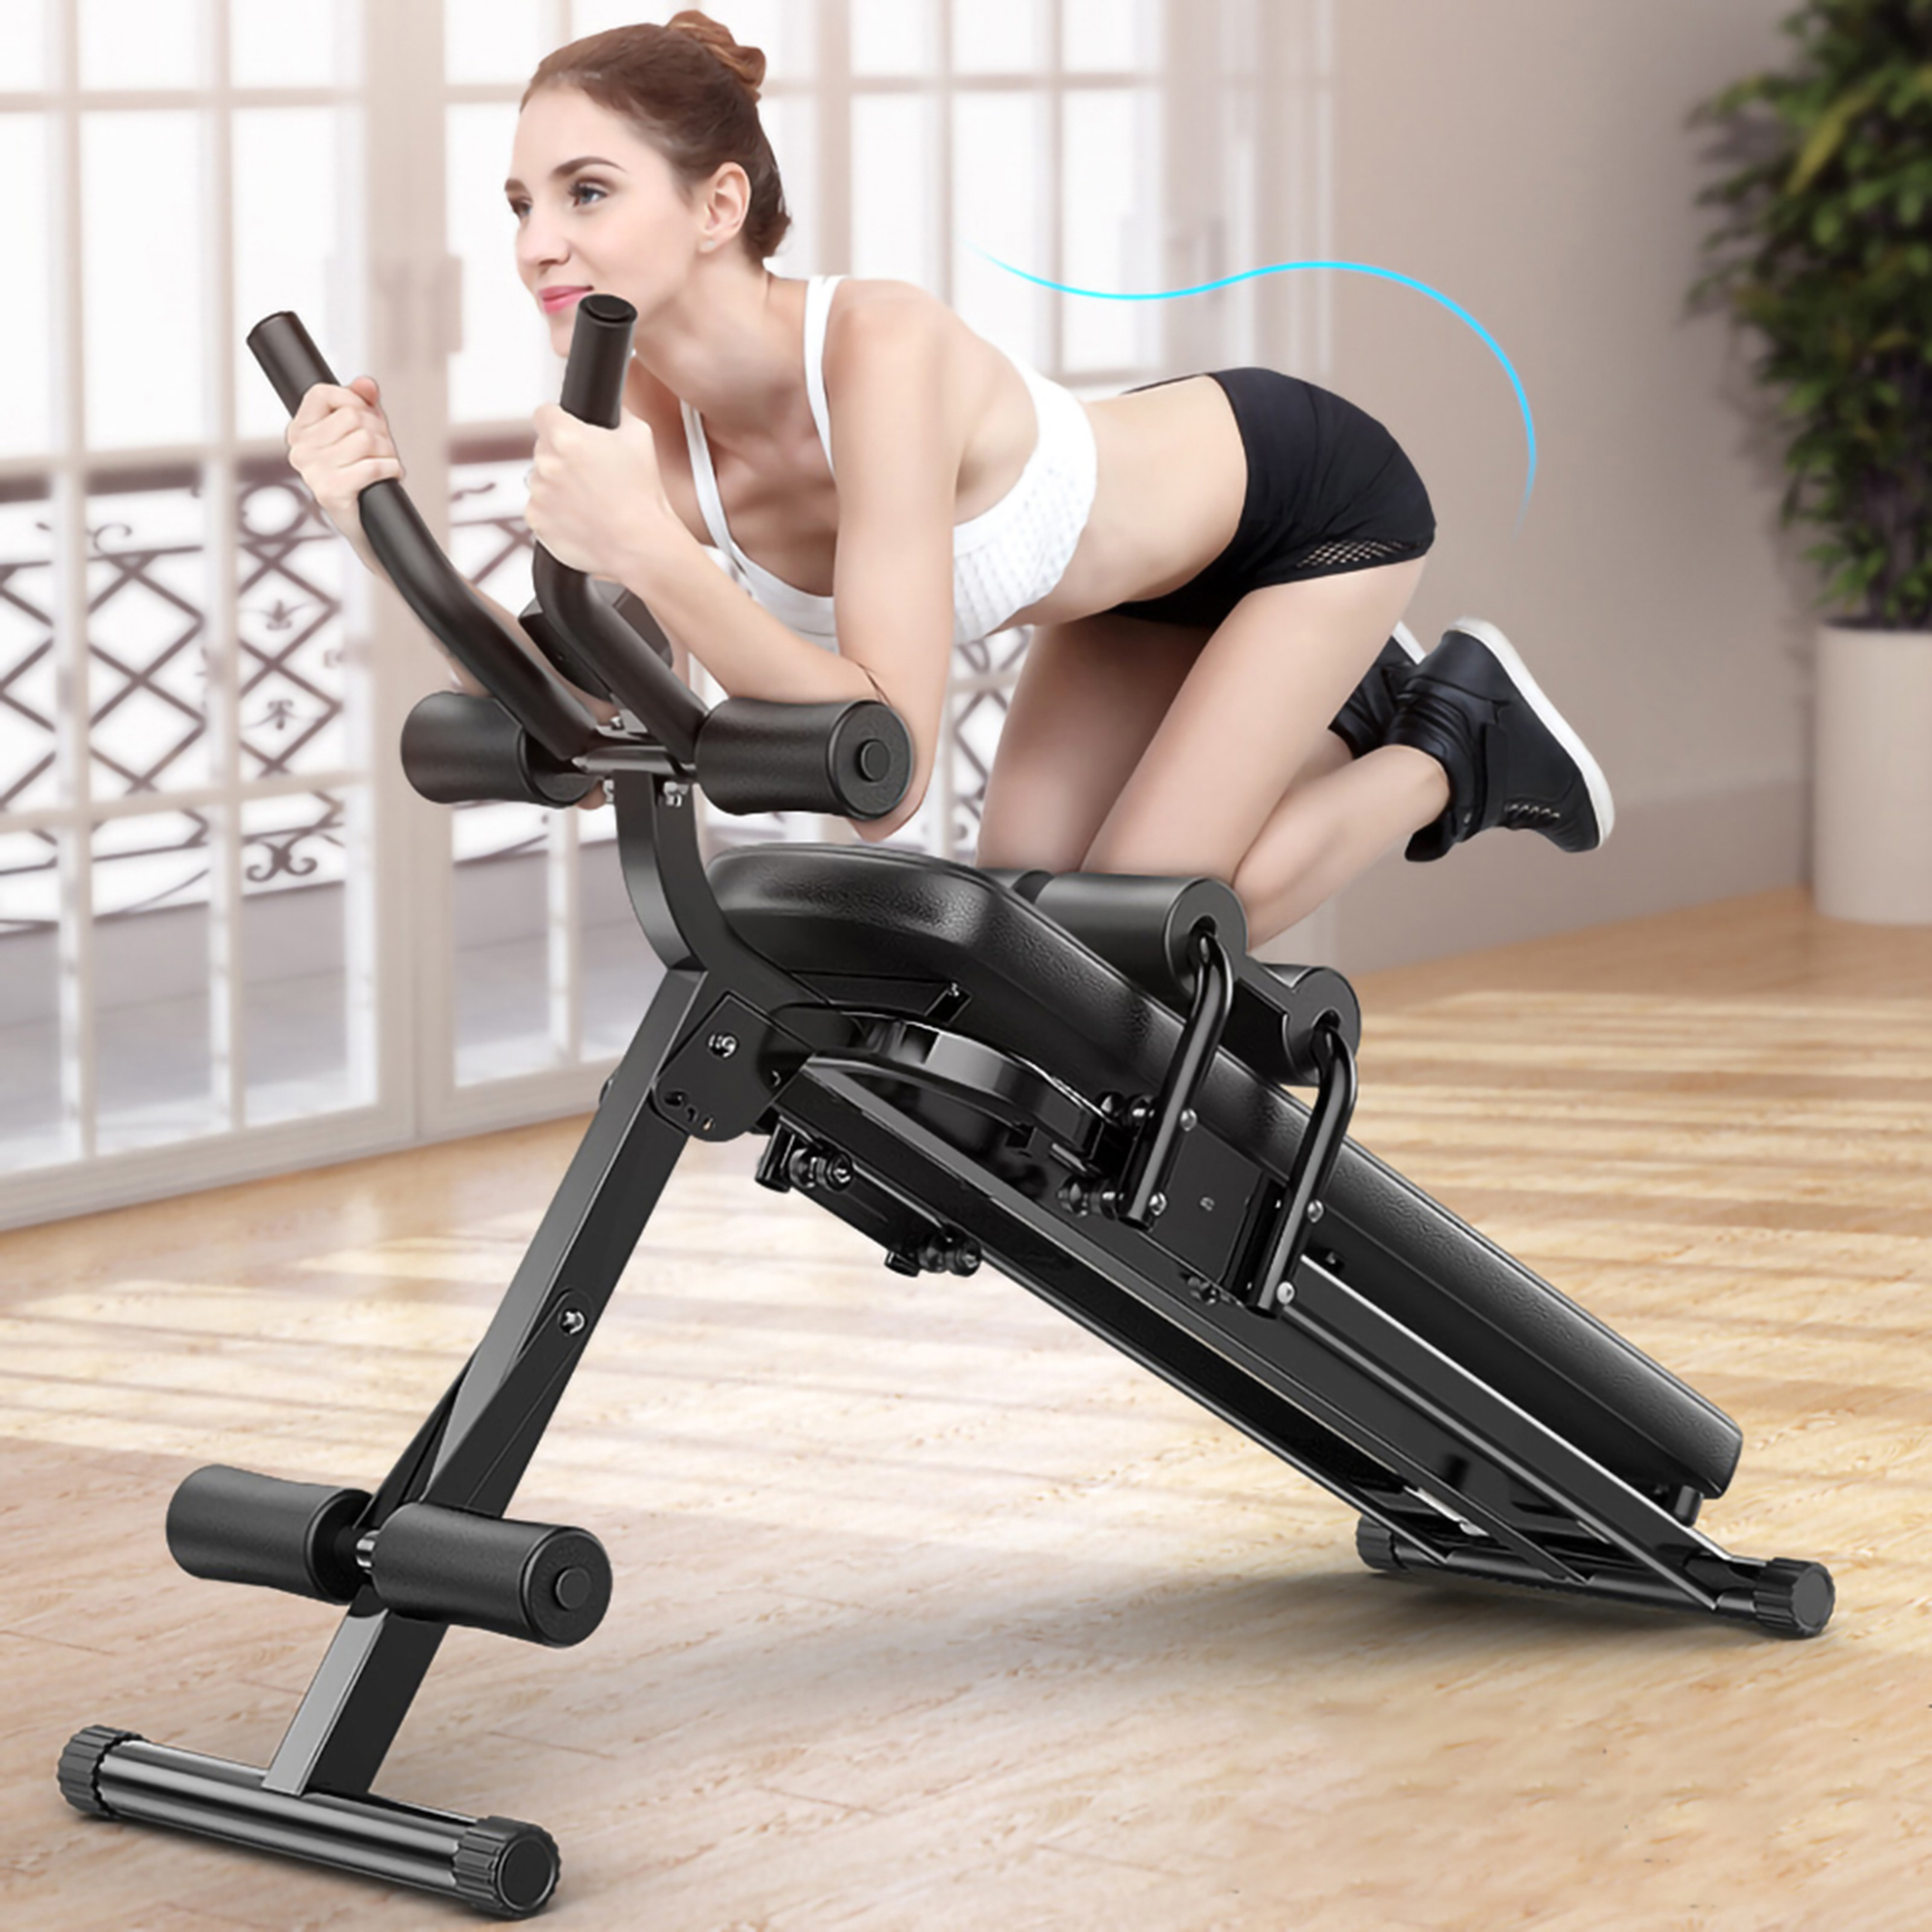 Abdominal Trainer Weight Bench Sit up Bench Ab Abdominal Crunch Ab Trainee Abdominal Exercise Equipment  Home Gym Lifting Training Leg Exercise Fitness Weight Bench for Abdominal Muscles Build - image 1 of 8